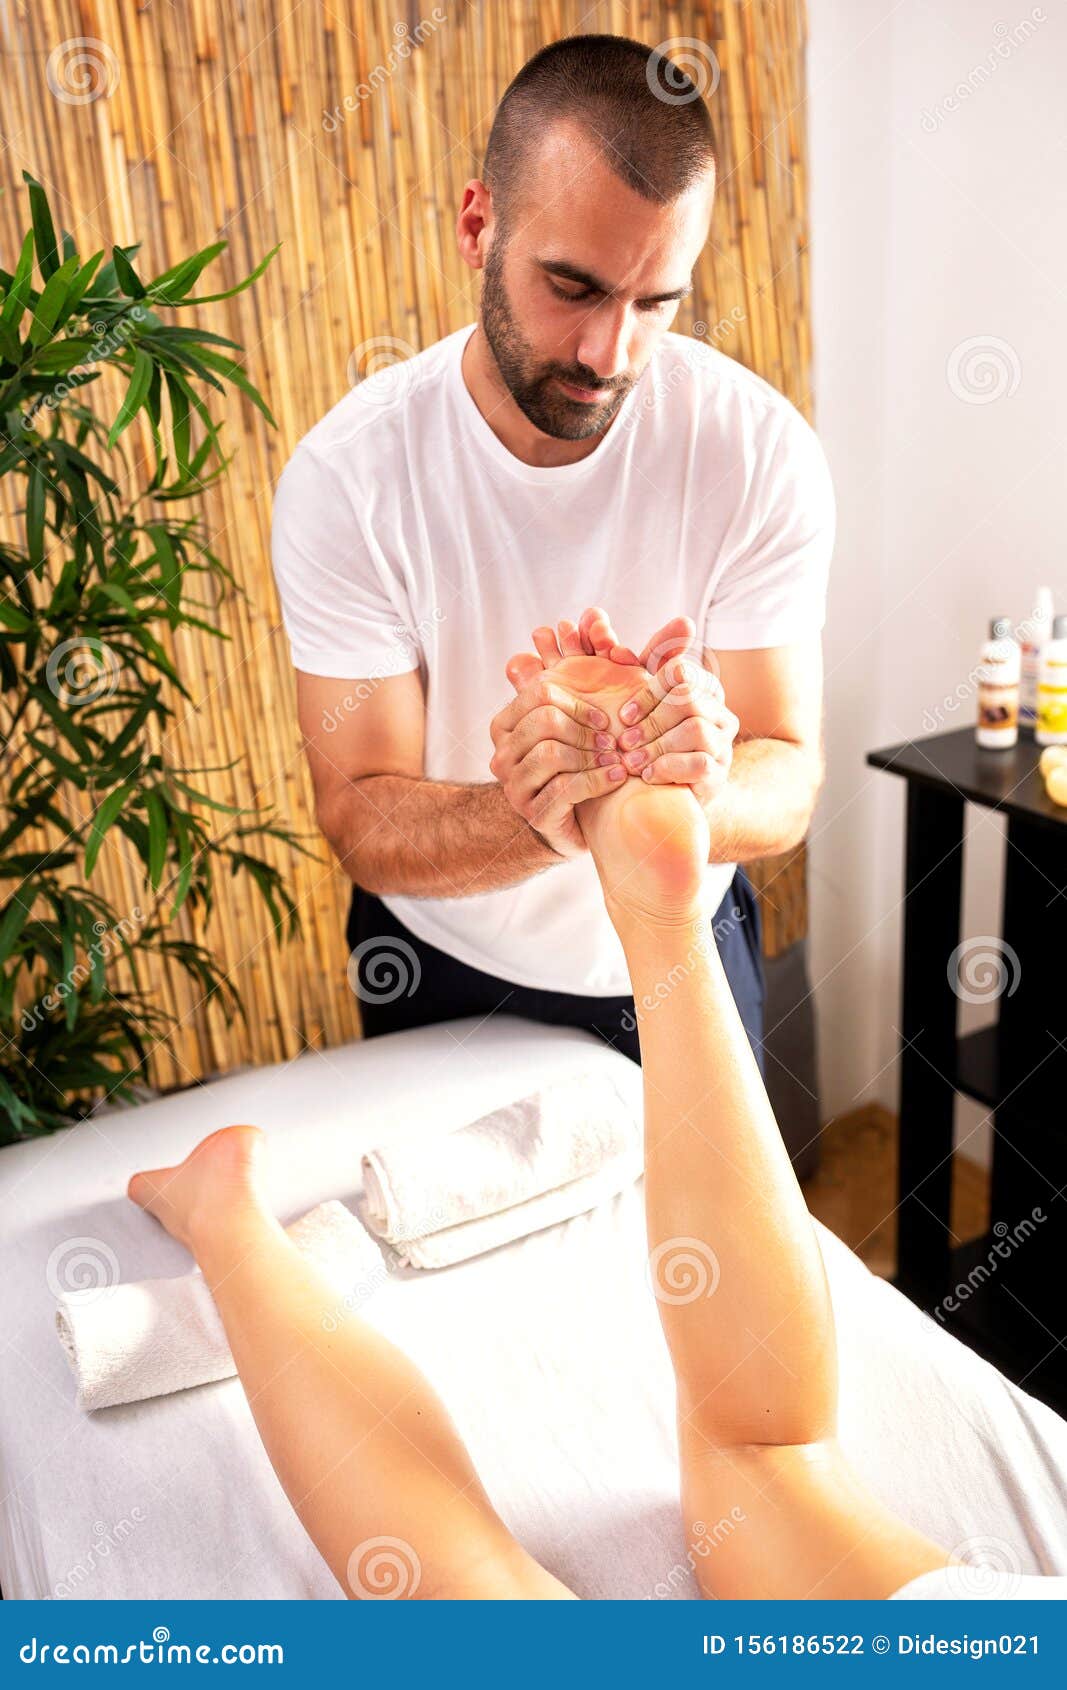 Masseur Helping His Client With